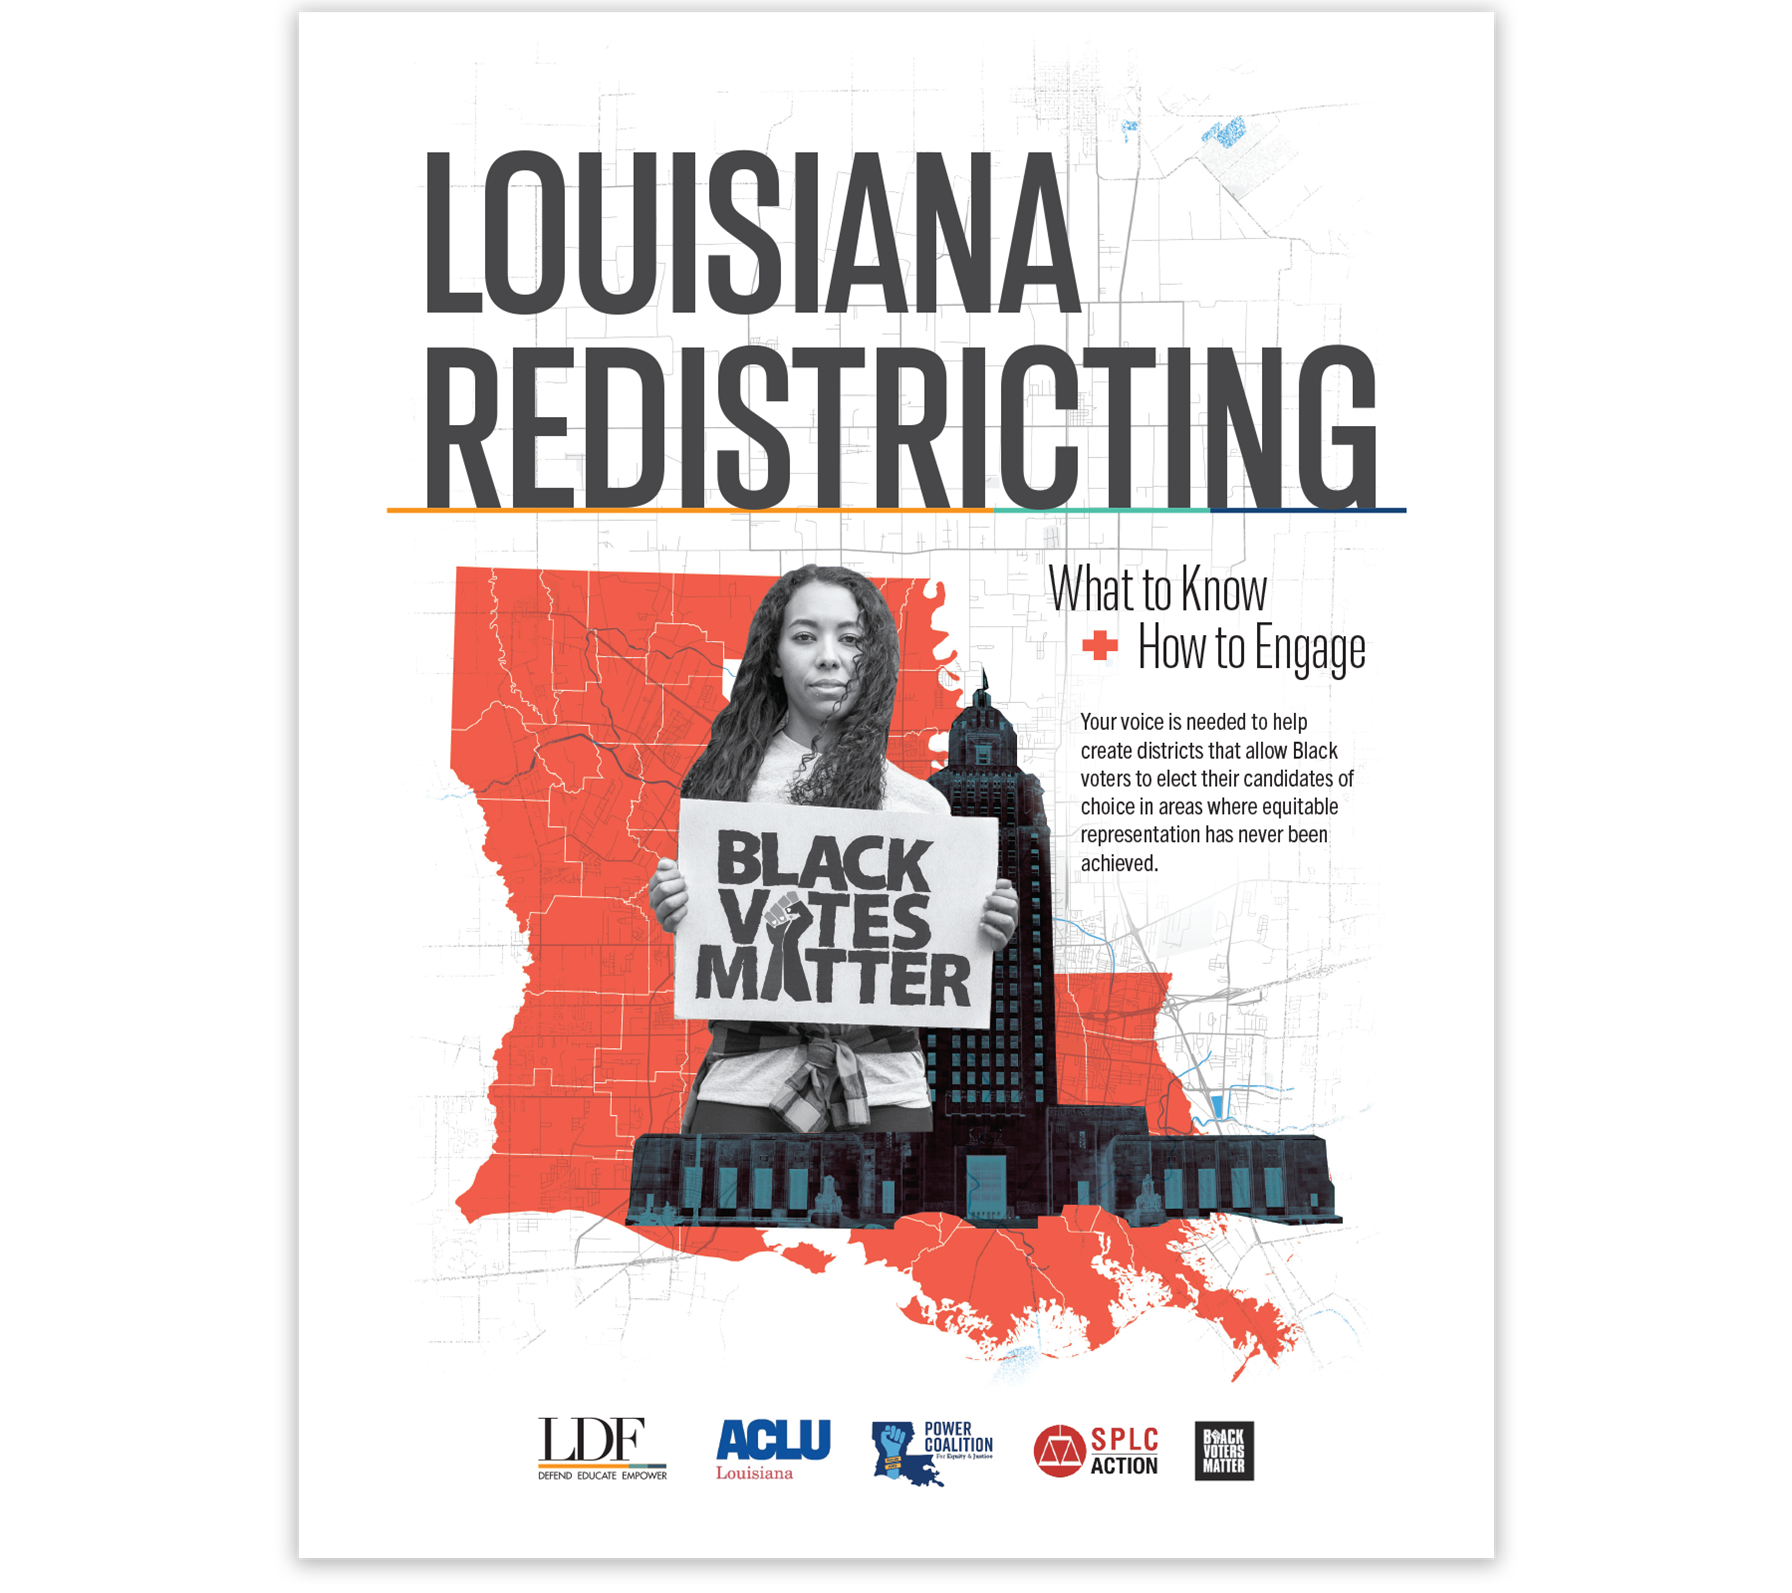 Louisiana Redistricting: What to know and how to engage